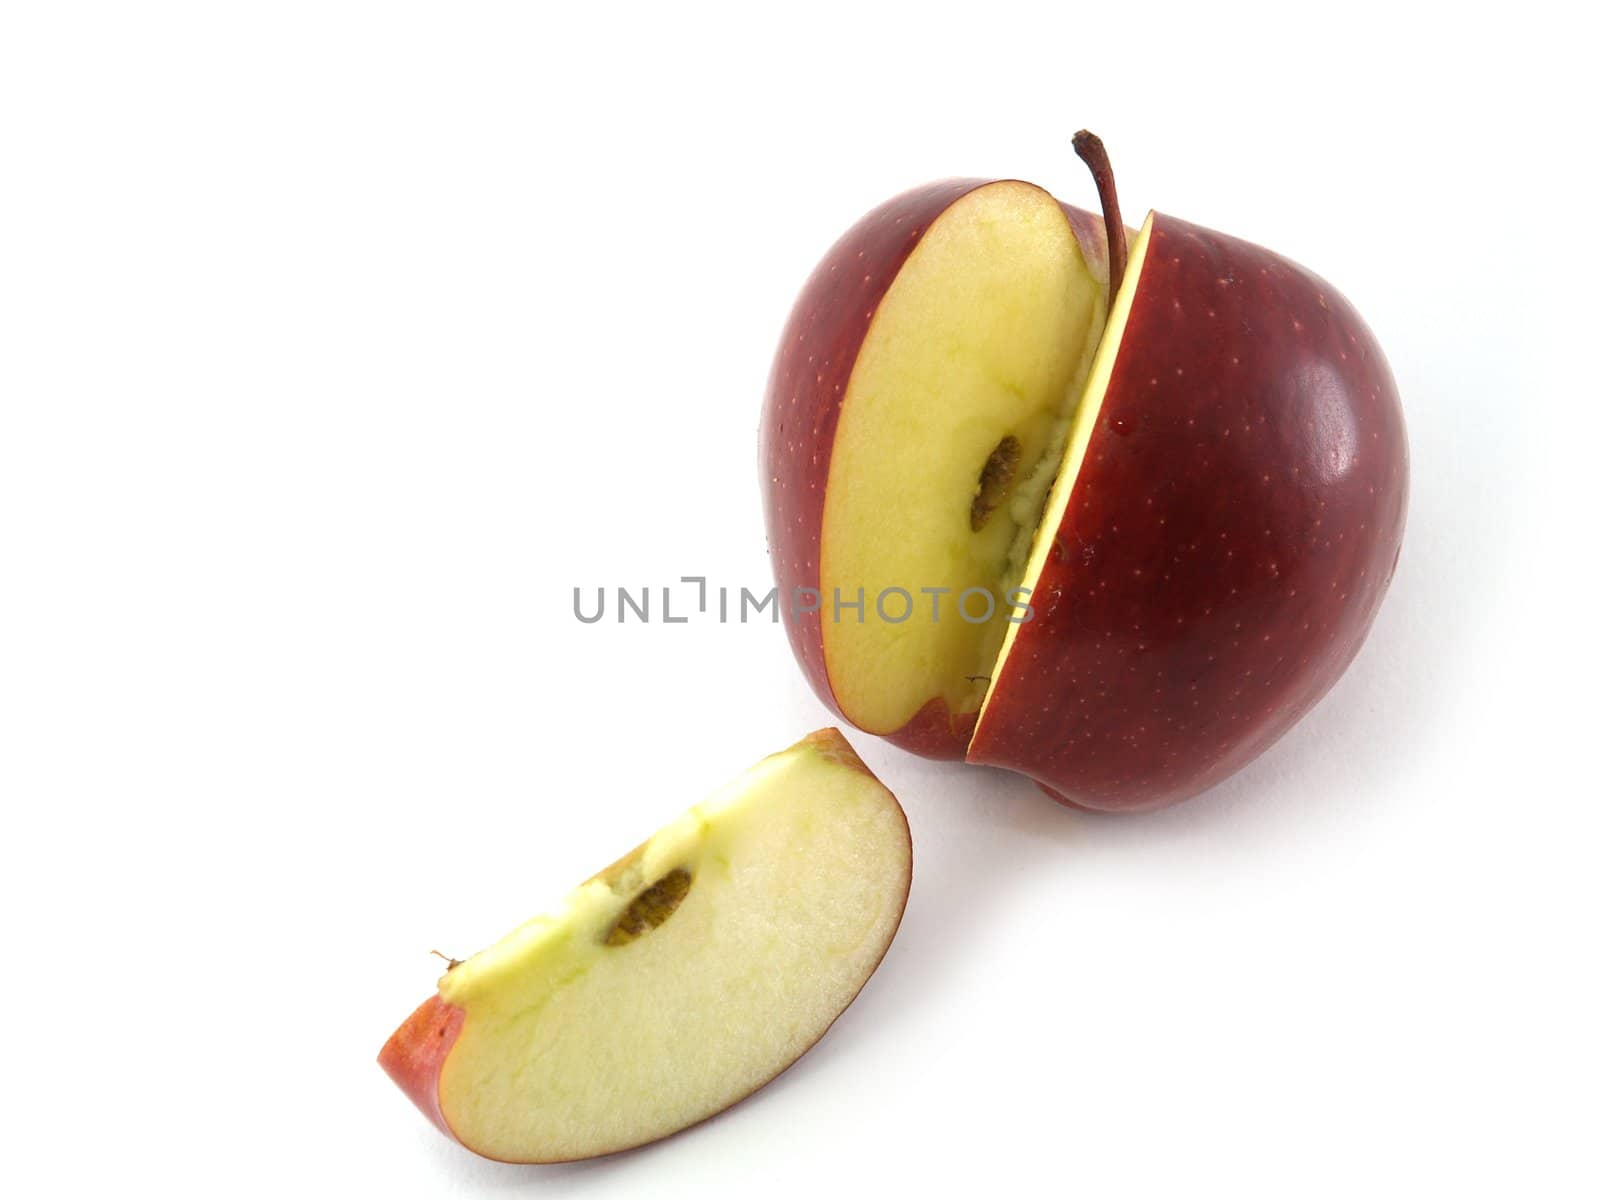 An apple variety called Red Cheaf isolated on white.
